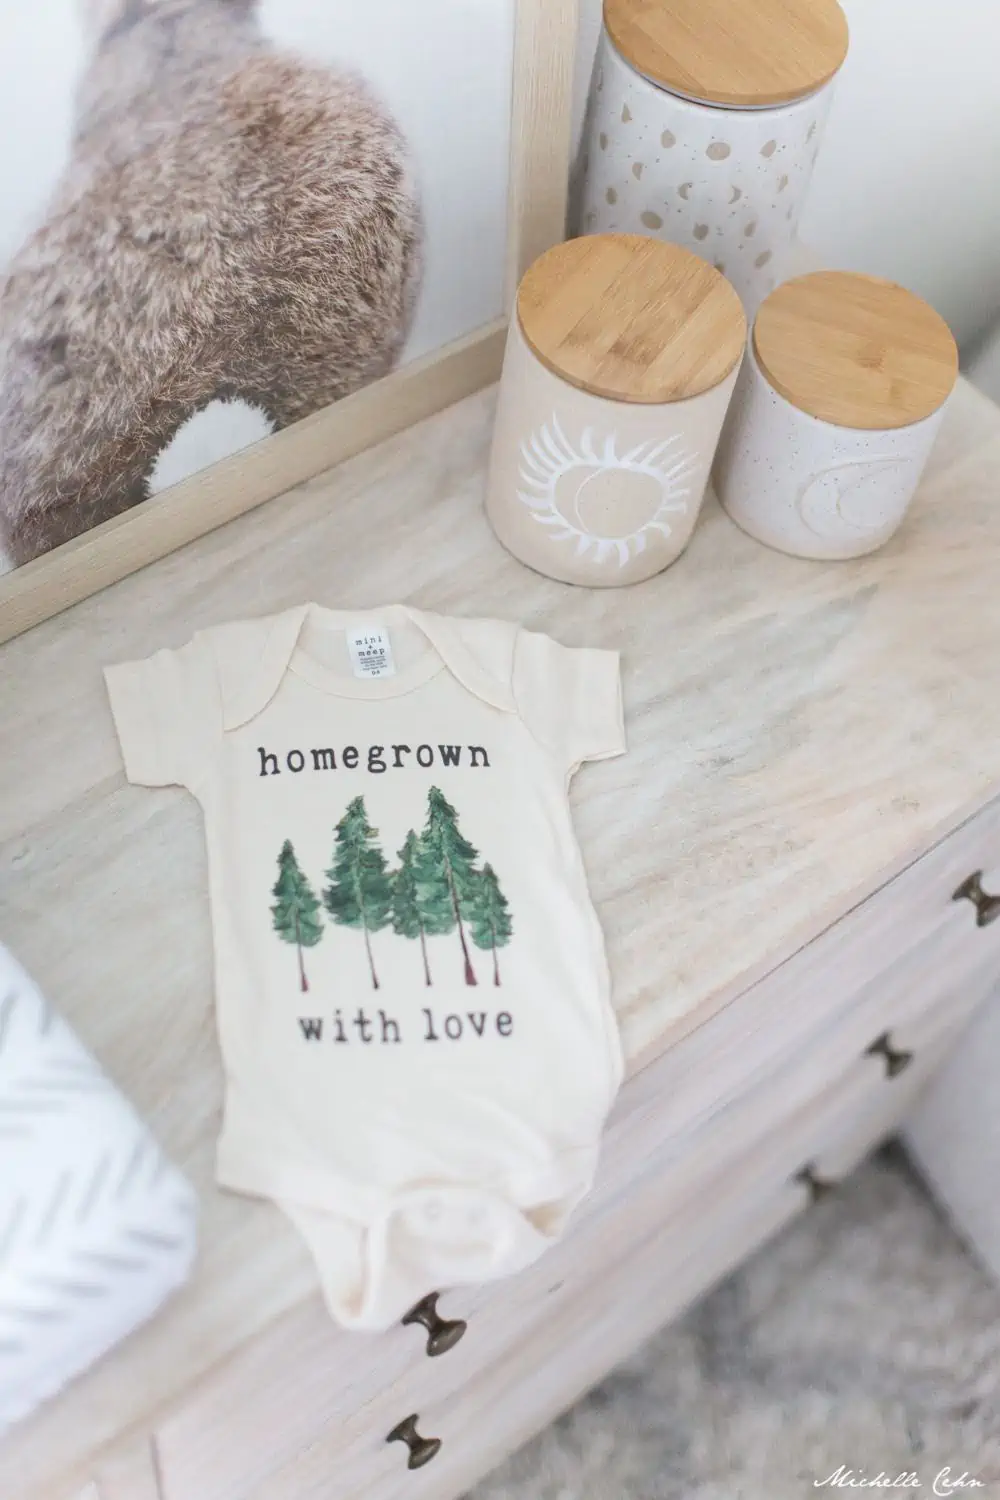 Vegan Onesie gift that says "homegrown with love" laying on a baby changing table. 